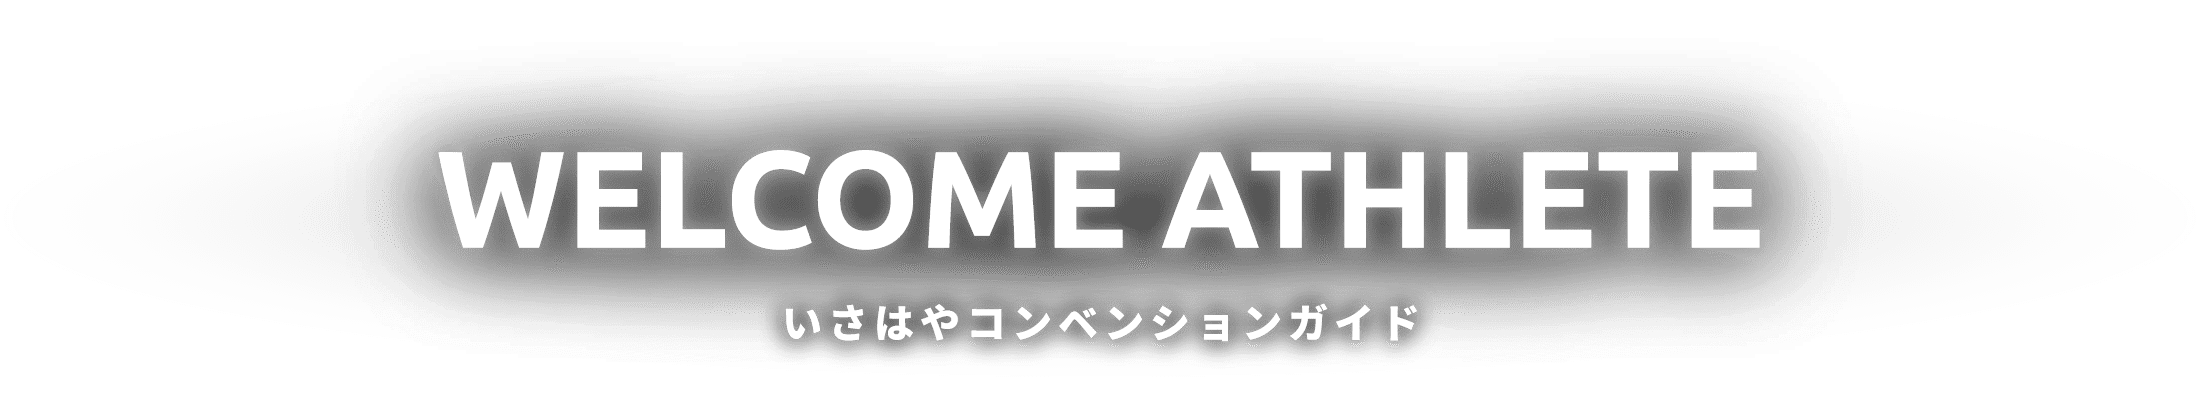 Welcome Athlete いさはやコンベンションガイド